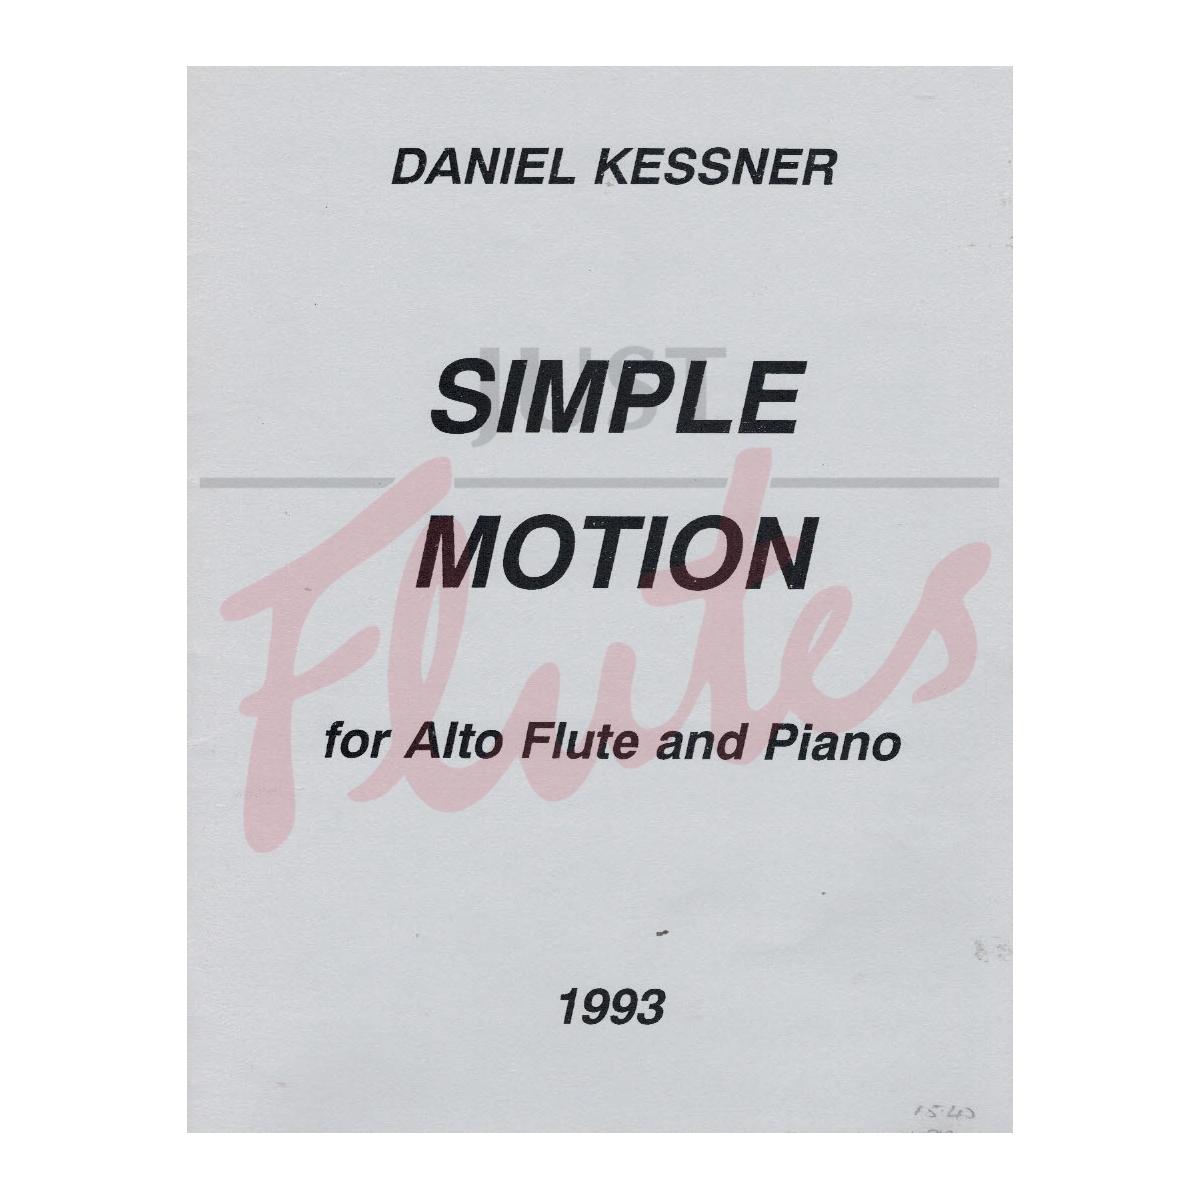 Simple Motion for Alto Flute and Piano